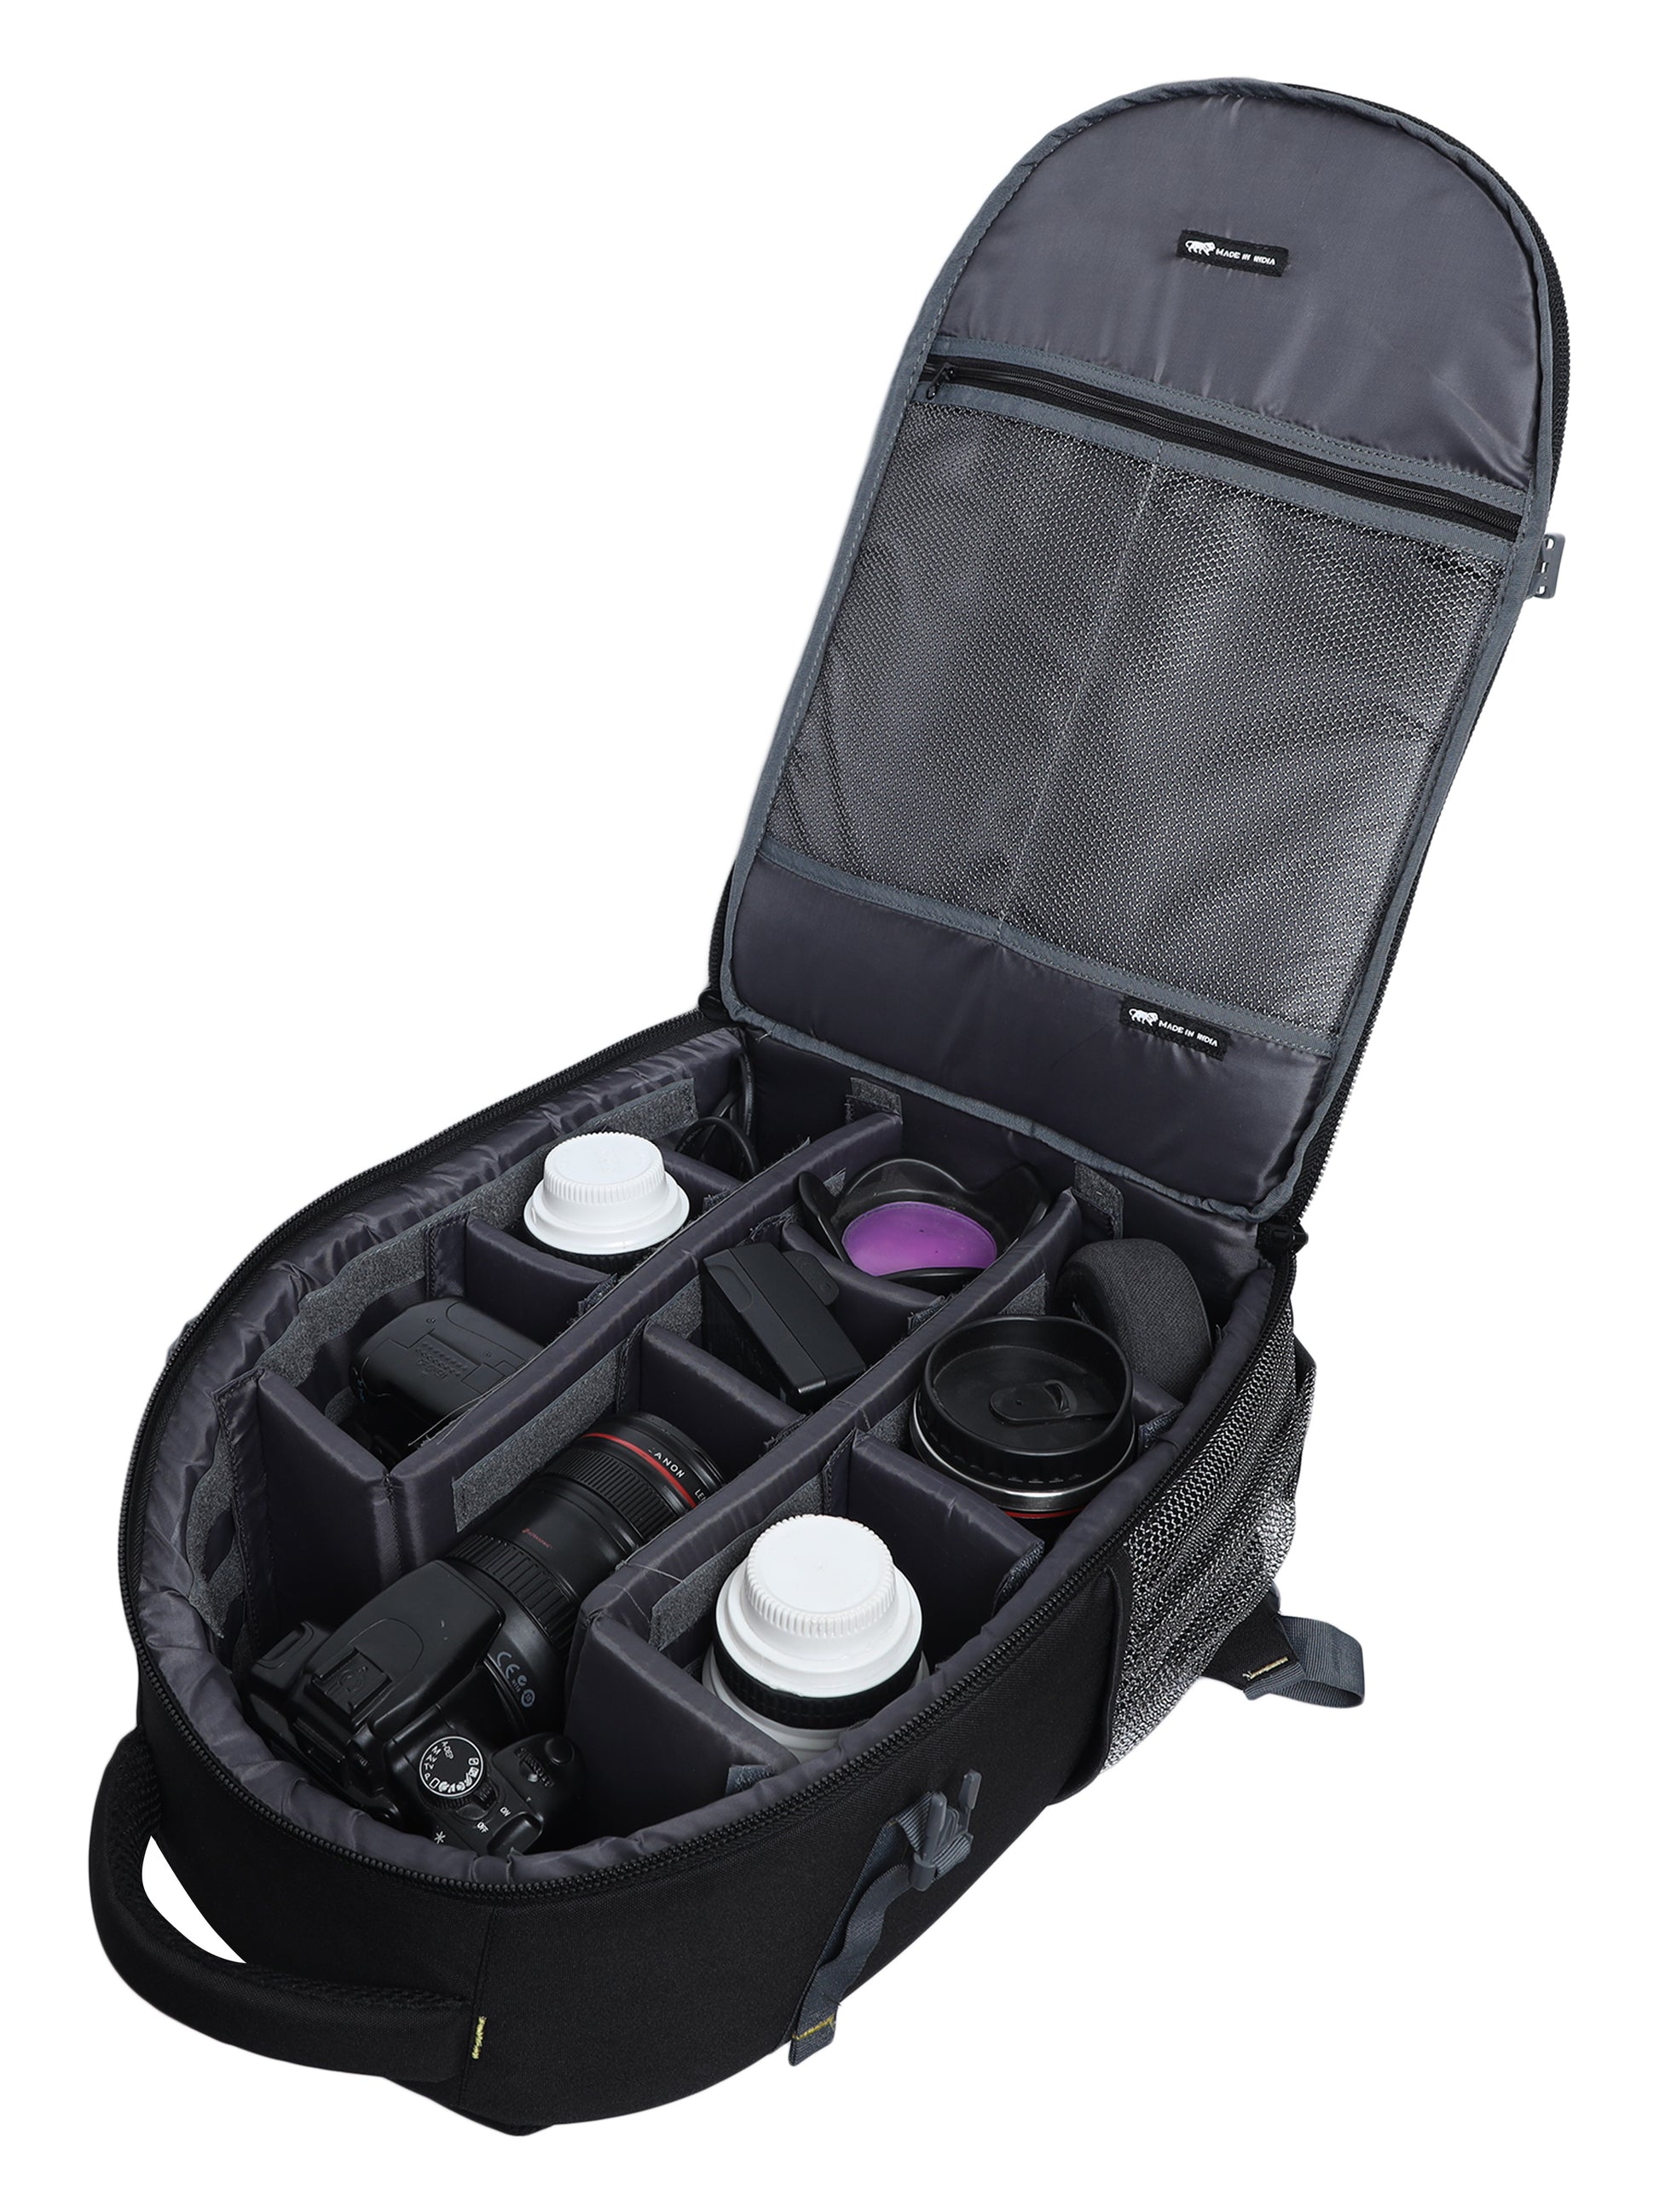 Open view of 'The Game Changer' camera bag from the Pinball Game series, revealing its well-organized compartments and neatly arranged camera and accessories. The bag offers dedicated slots for the camera body, lenses, memory cards, and other essentials, ensuring easy access and efficient storage. The vibrant interior lining adds a touch of style to the practicality of the bag, making it an ideal choice for photographers seeking functionality and aesthetics.